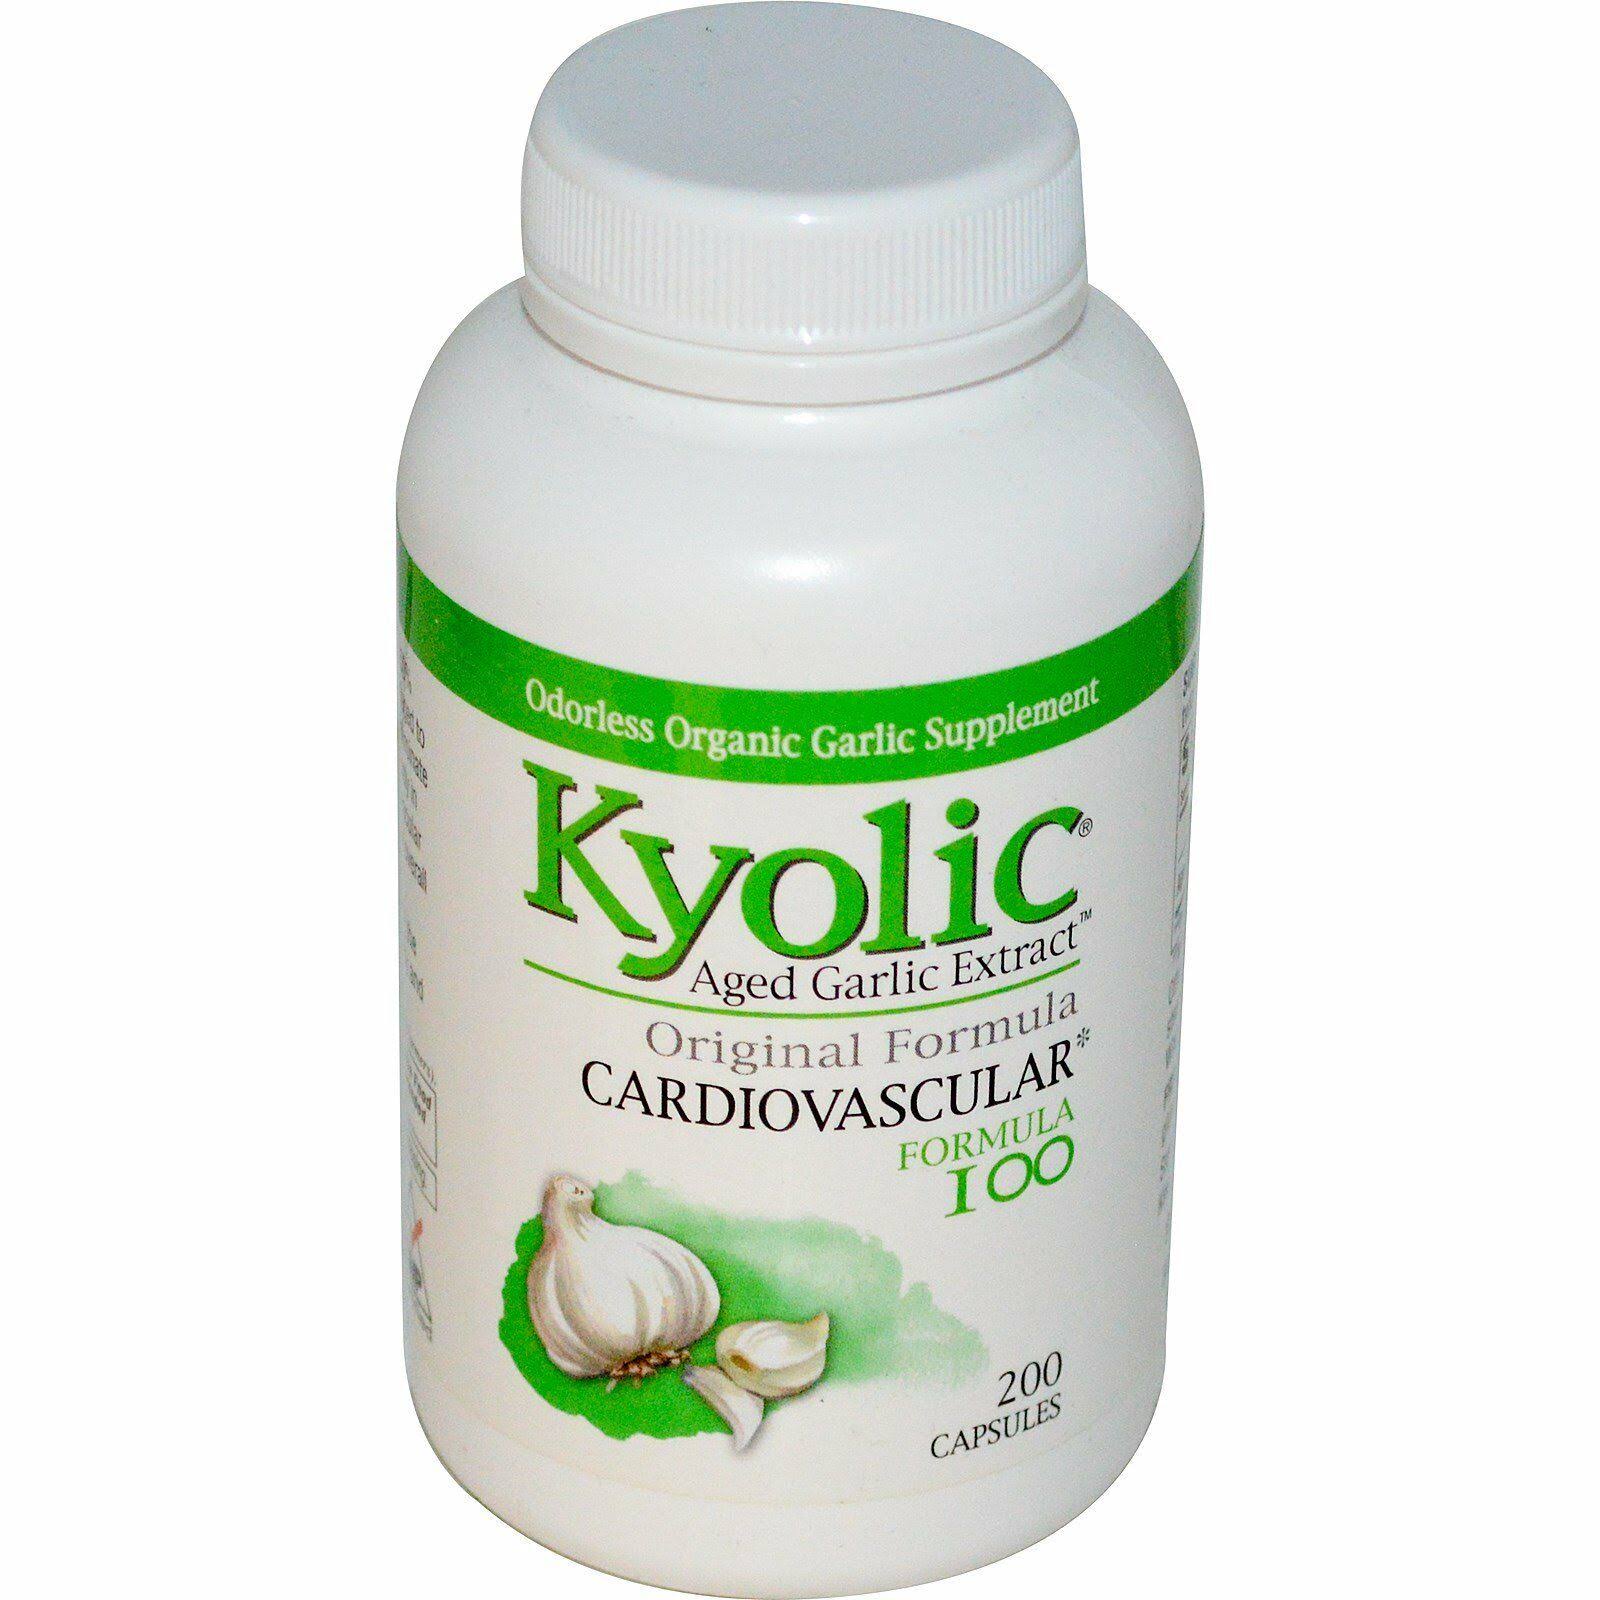 Kyolic Aged Garlic Extract Cardiovascular Supplement - 200 Tablets